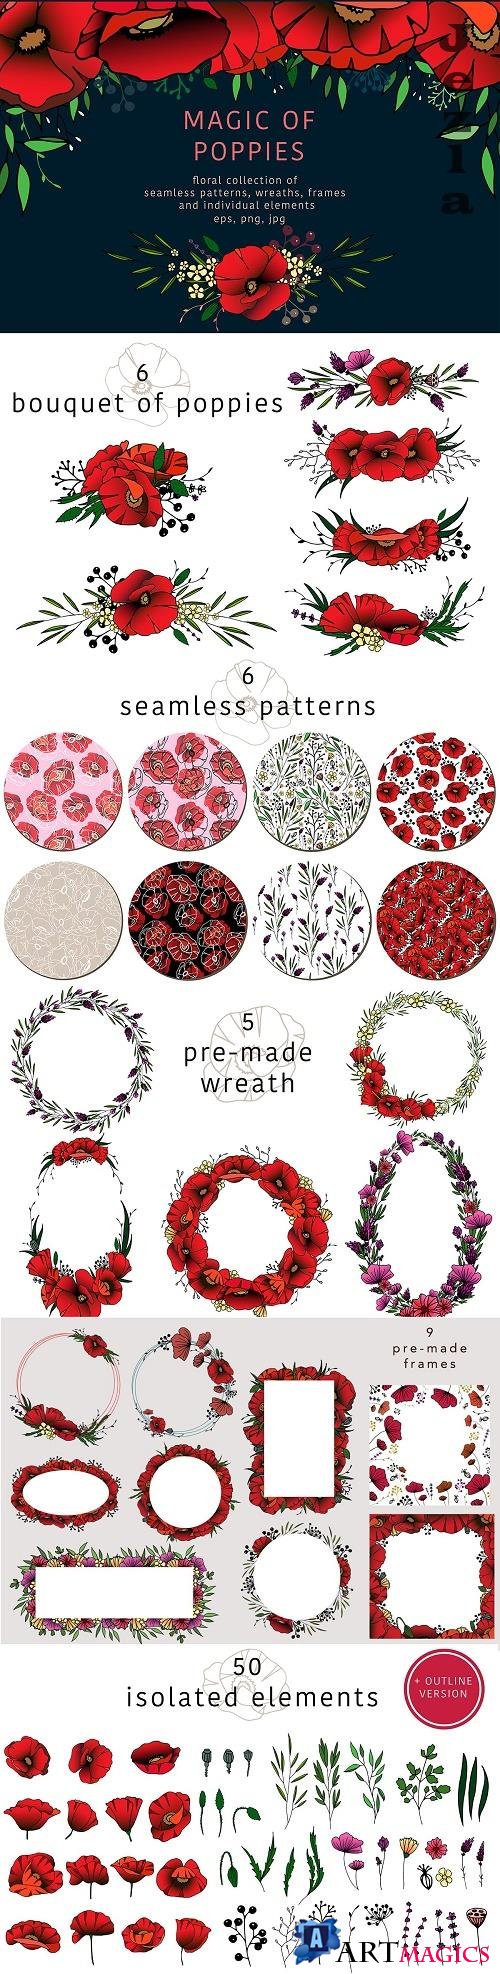 Magic of poppies - floral collection - 2135537